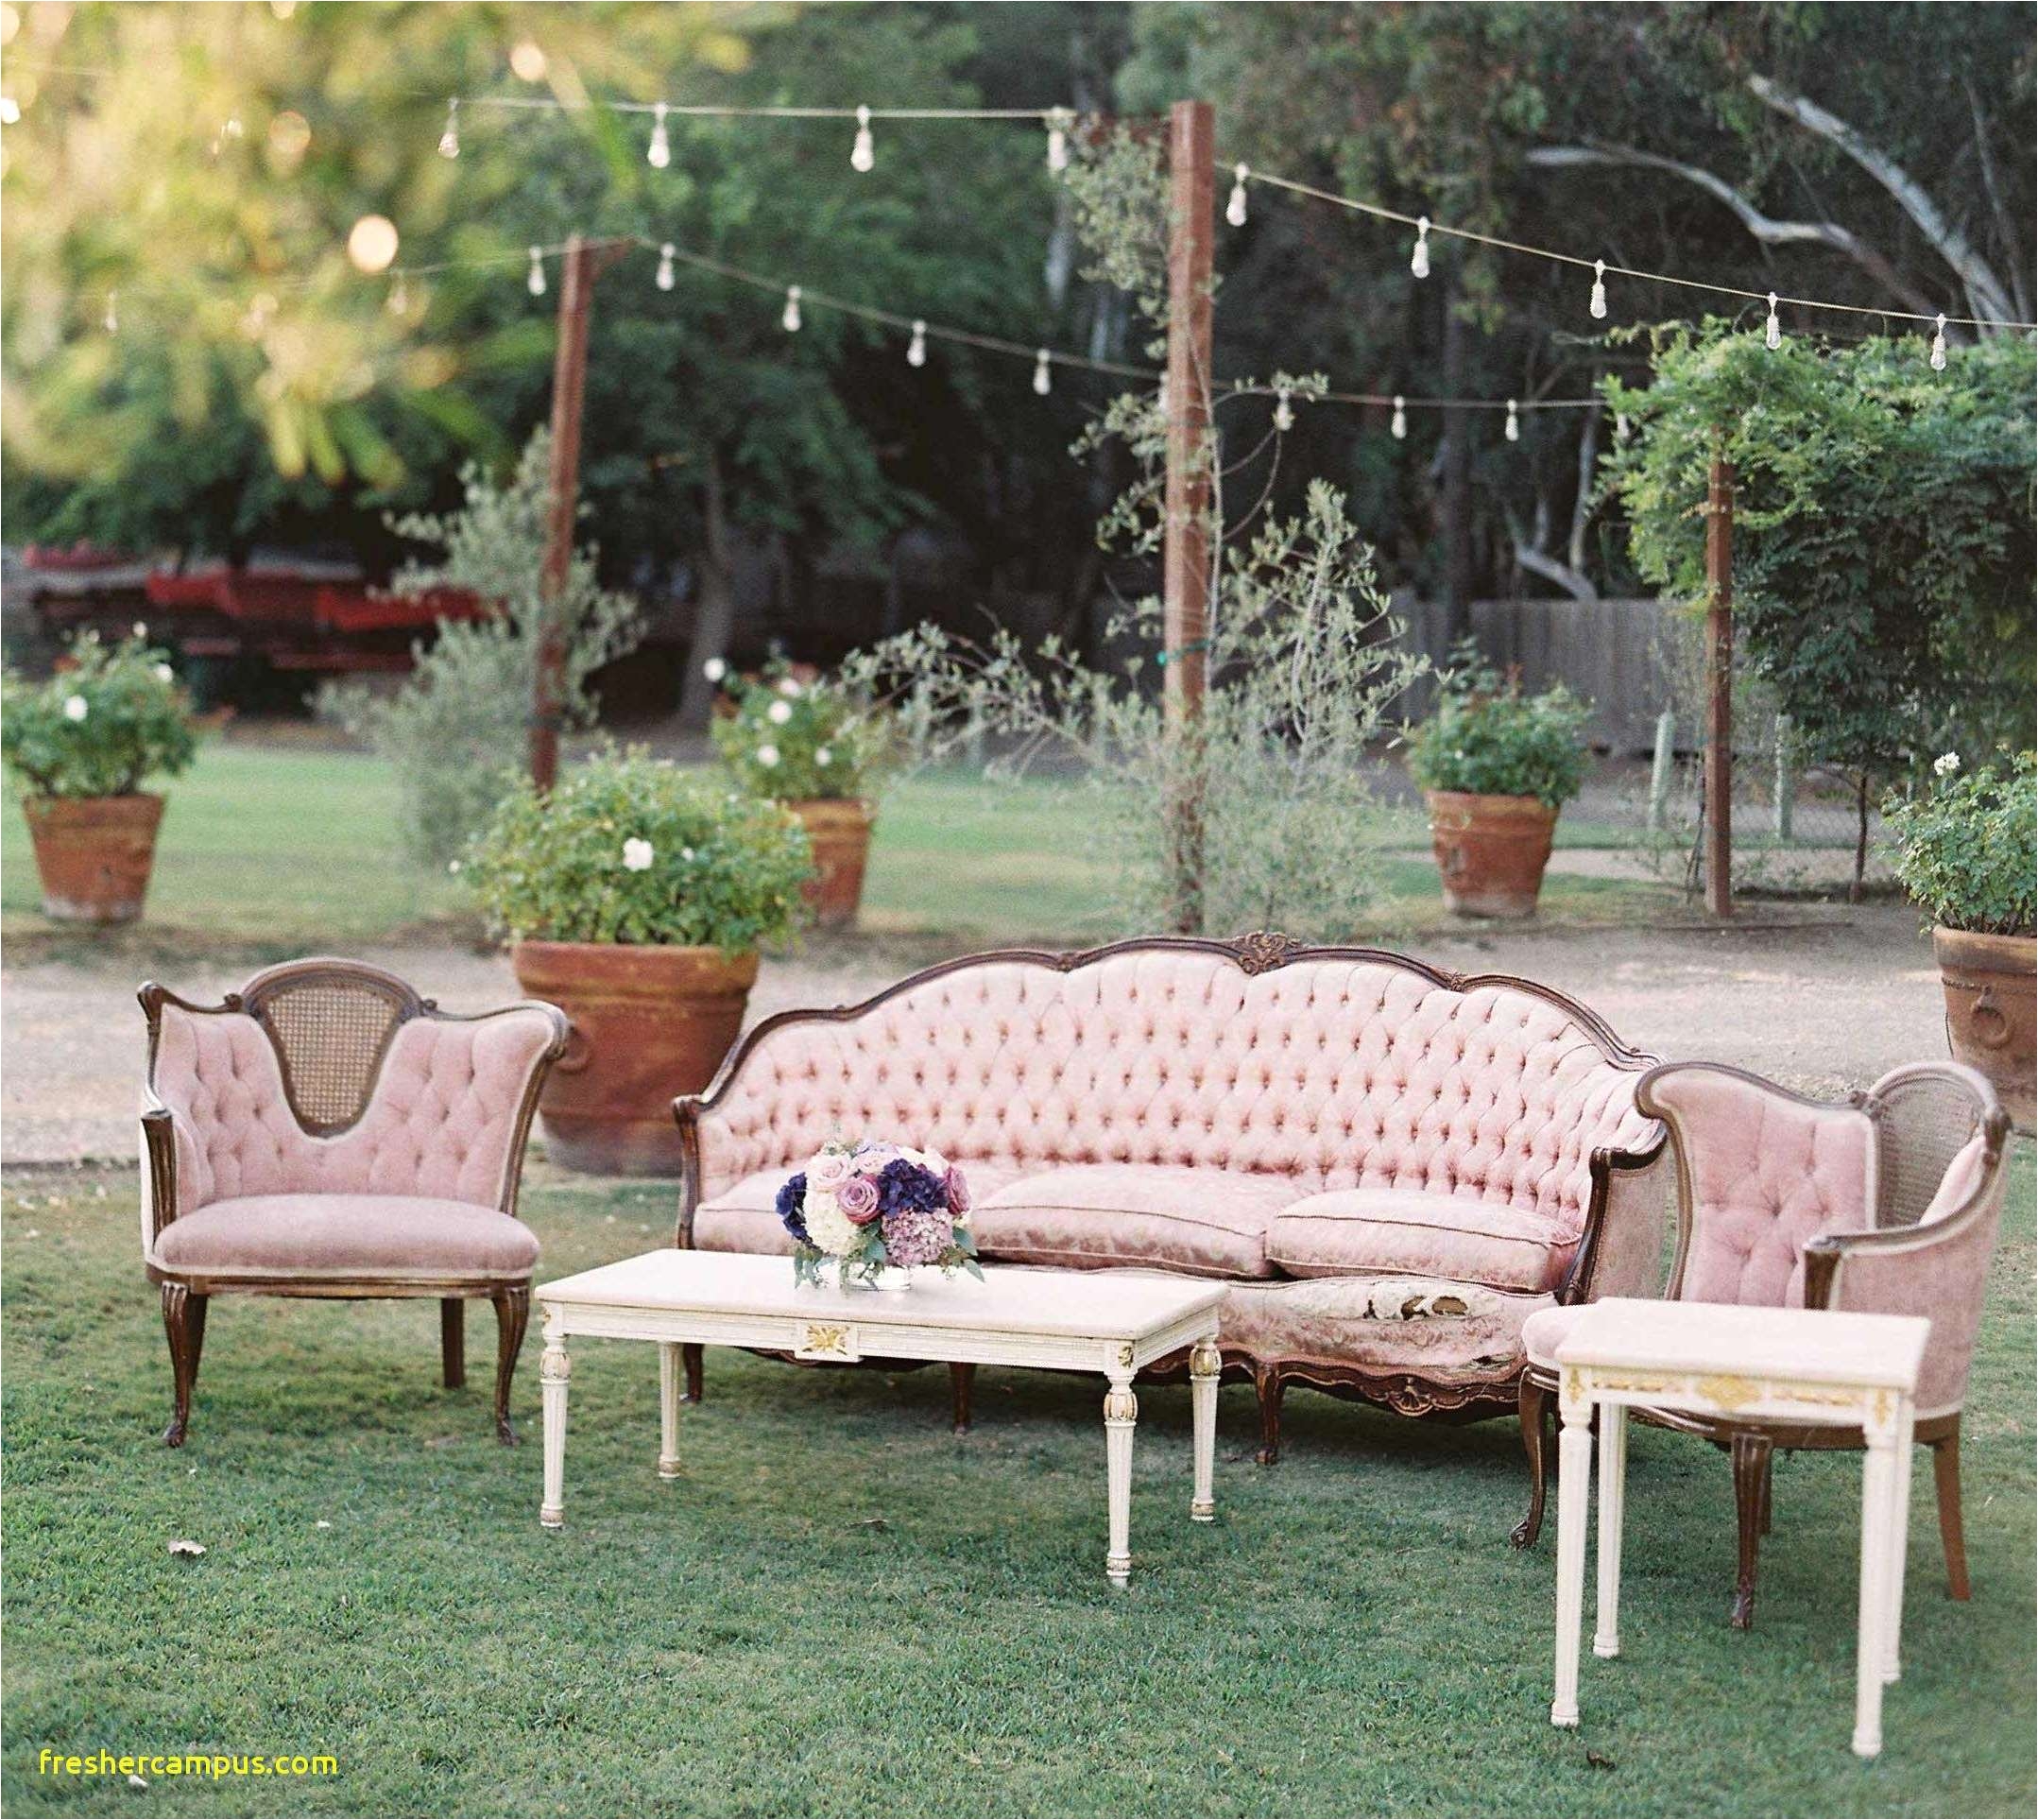 Cheap Table and Chair Rental Near Me 21 Beautiful Bench Rental for Wedding Near Me Pics Best Design